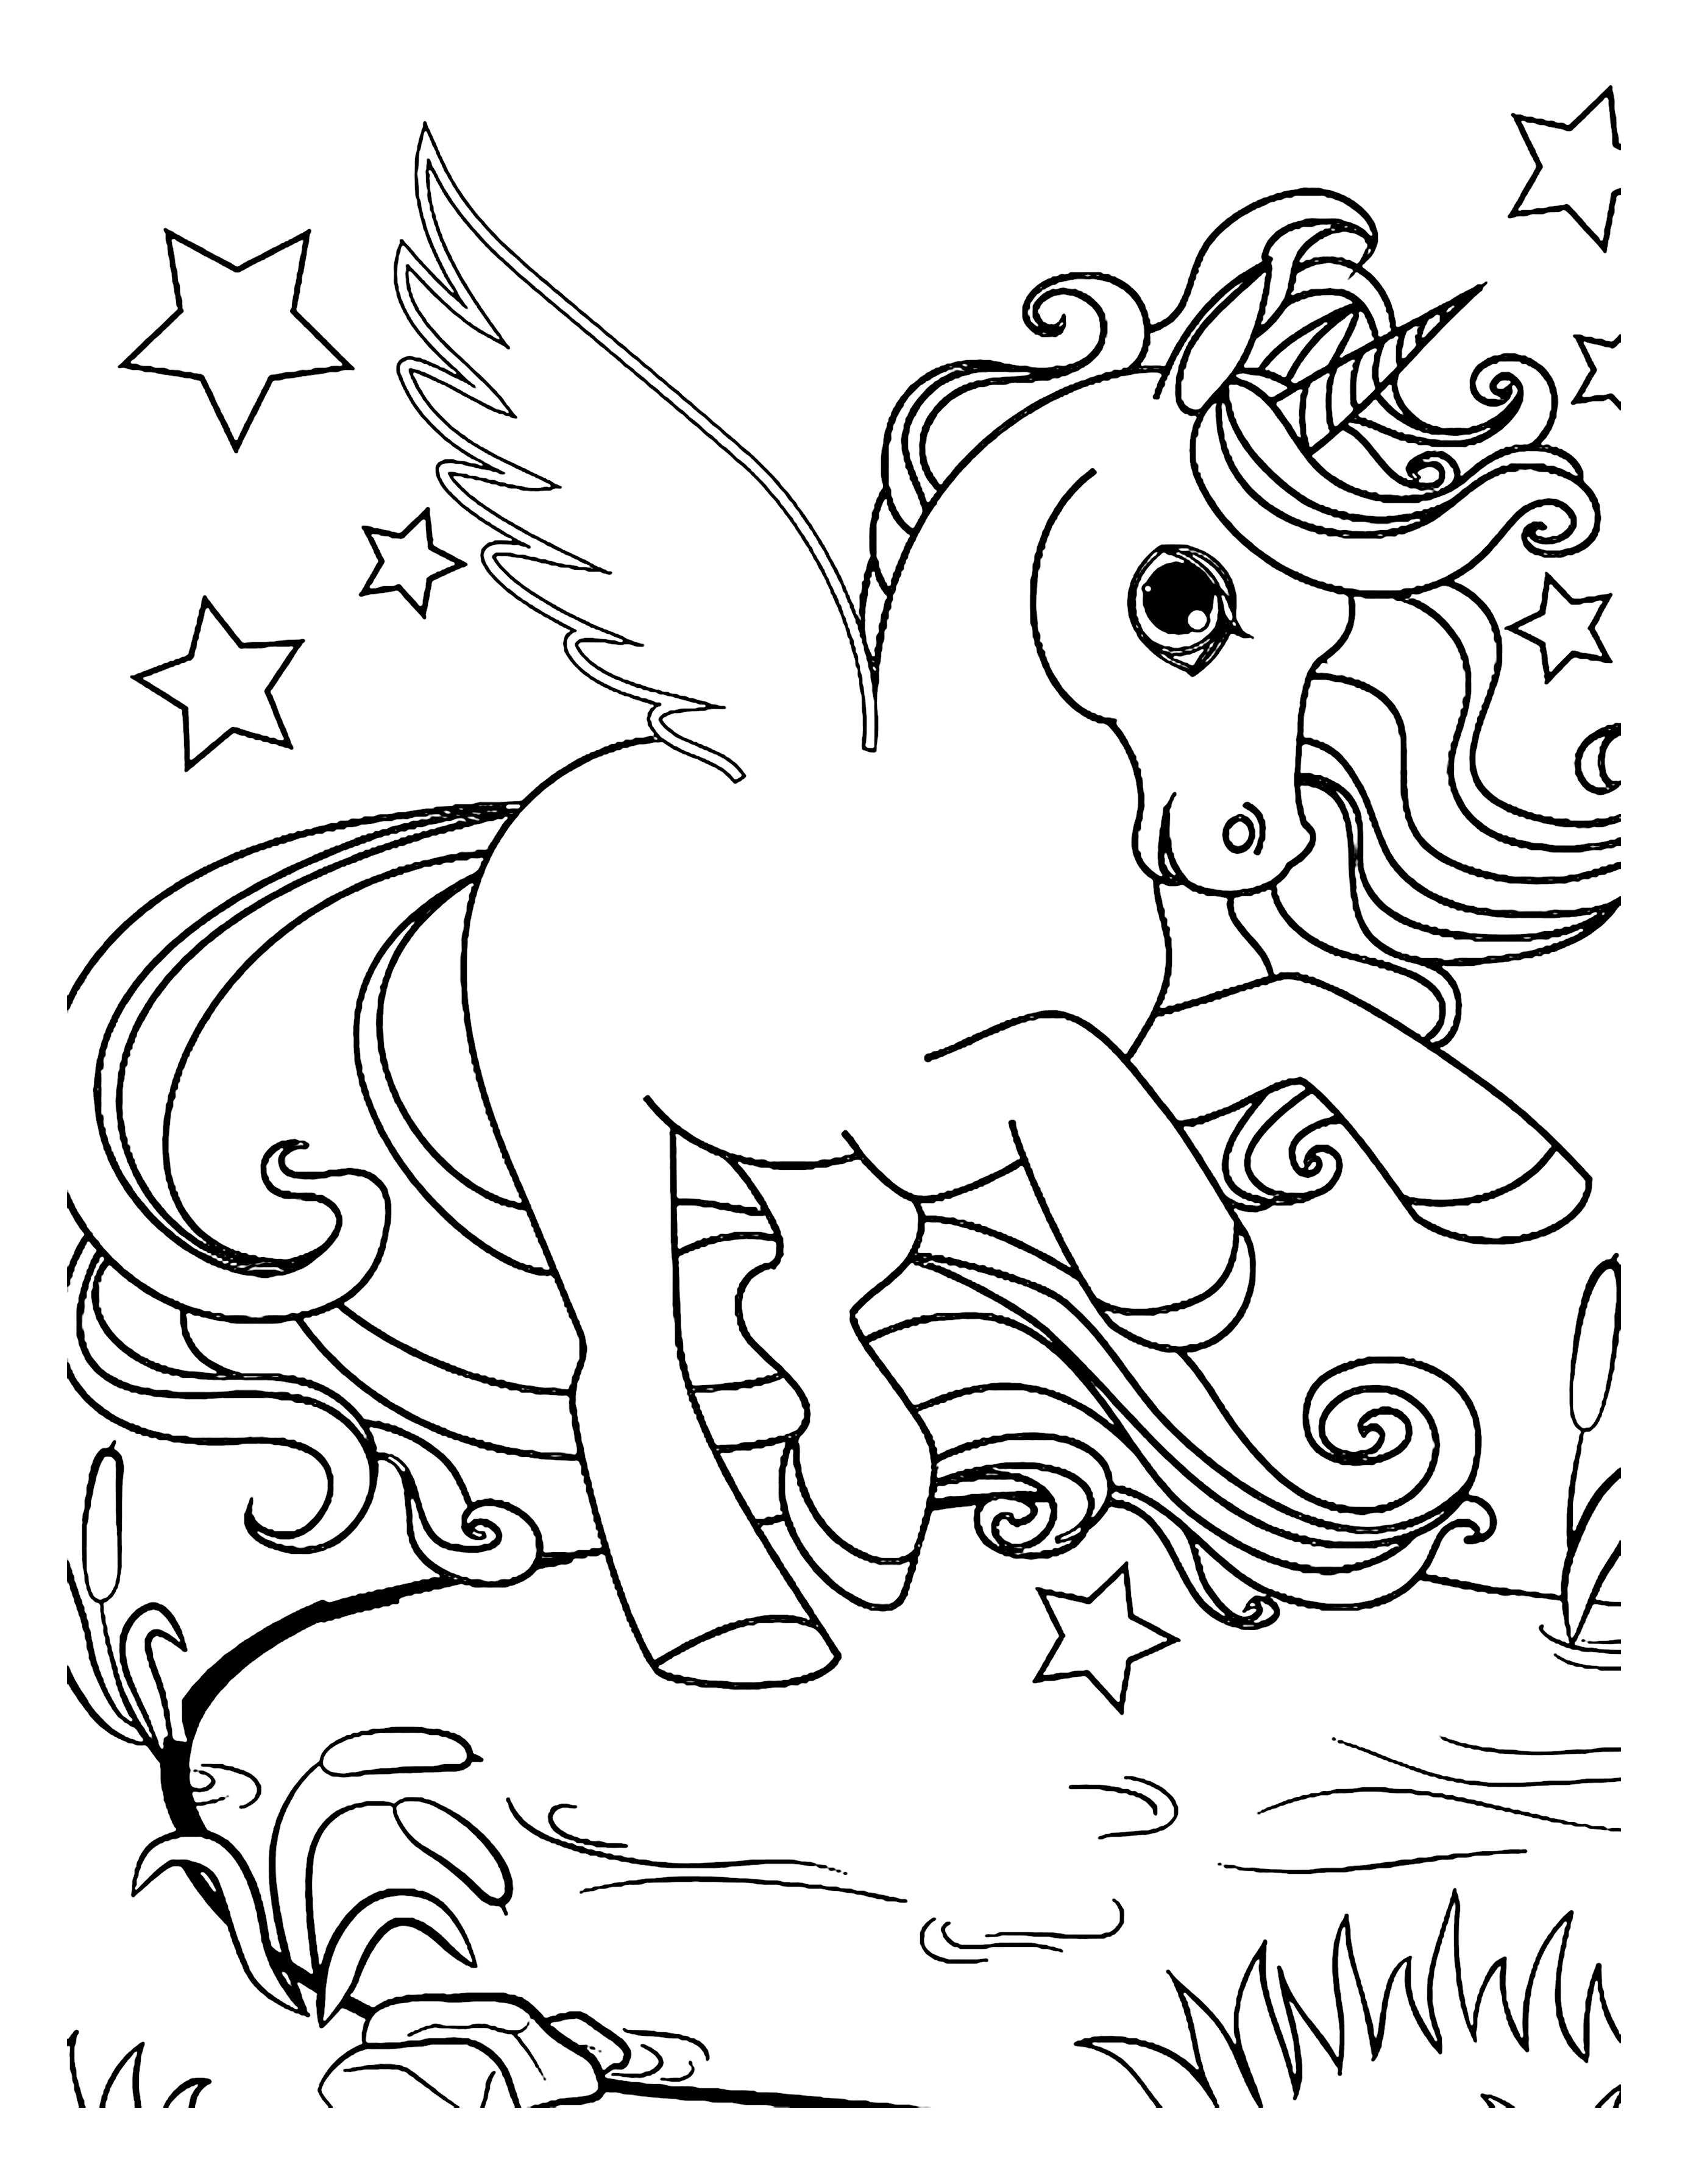 unicorn-coloring-pages-pintable-coloring-ideas-licorne-coloriage-my